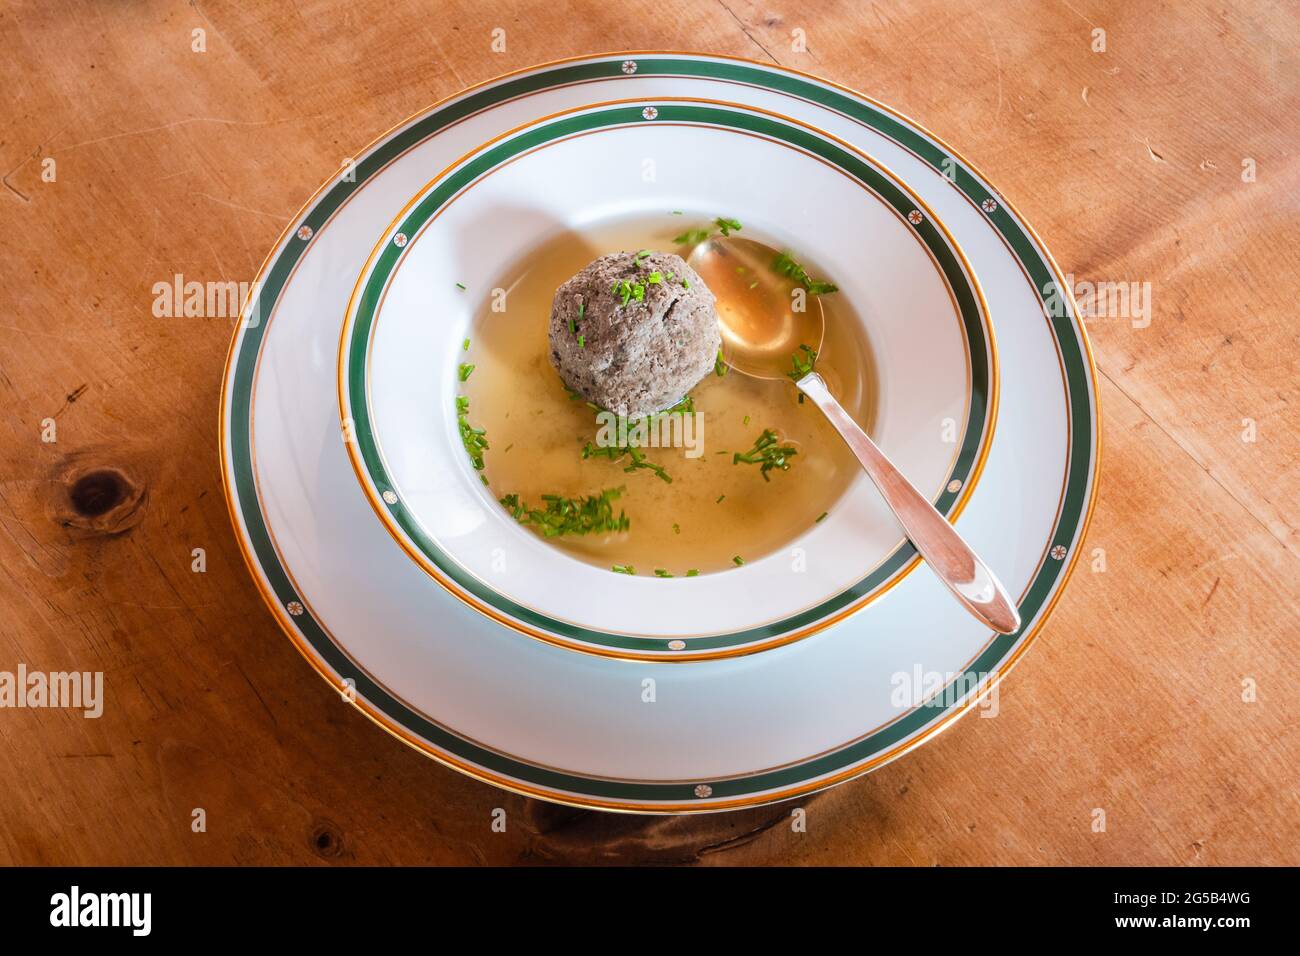 Leberknoedelsuppe, an Austrian Liver Dumpling Soup, a Beef Broth with Chives with Spoon Stock Photo